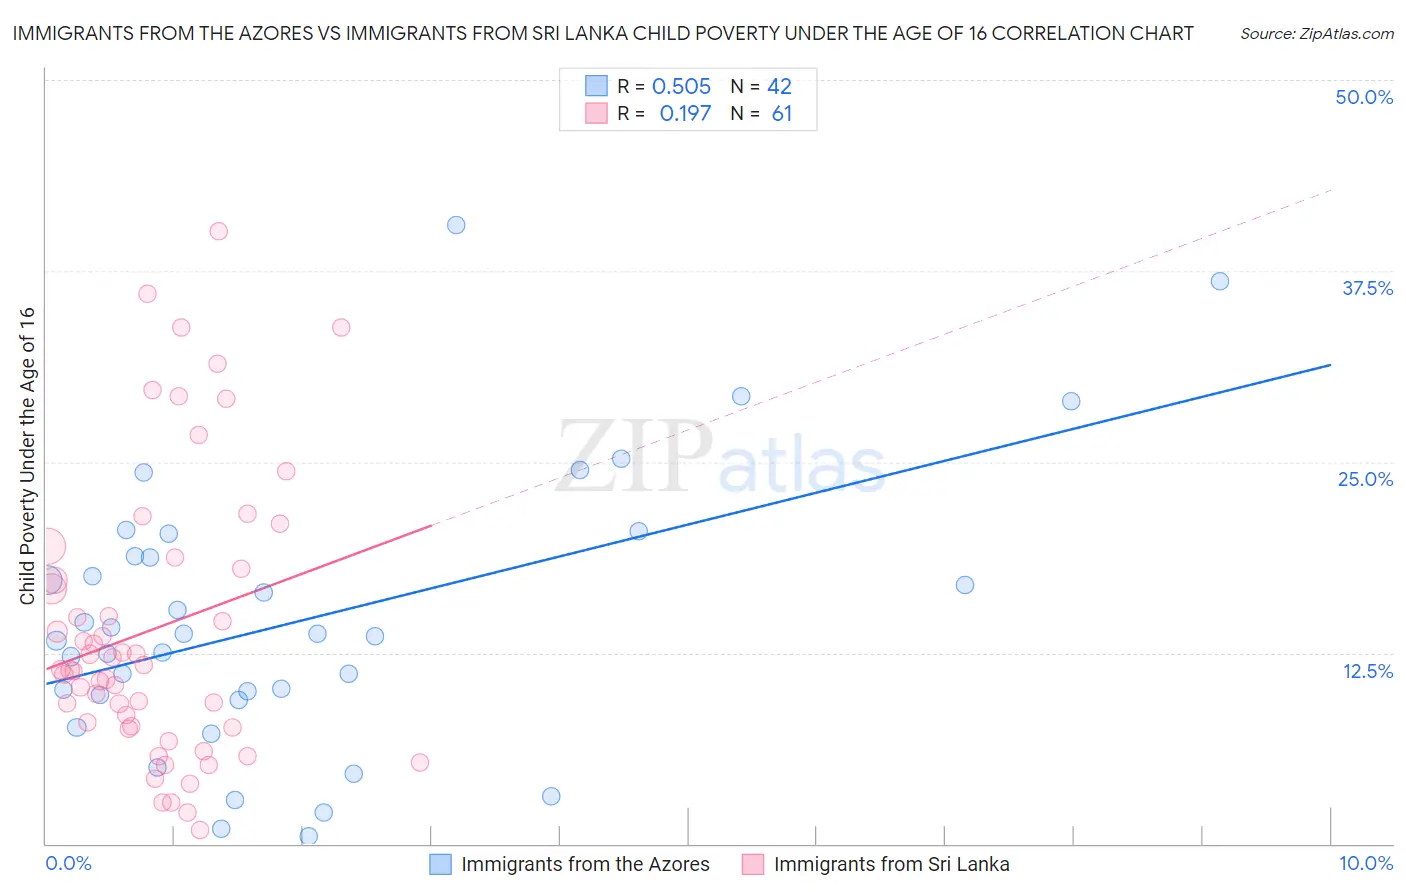 Immigrants from the Azores vs Immigrants from Sri Lanka Child Poverty Under the Age of 16